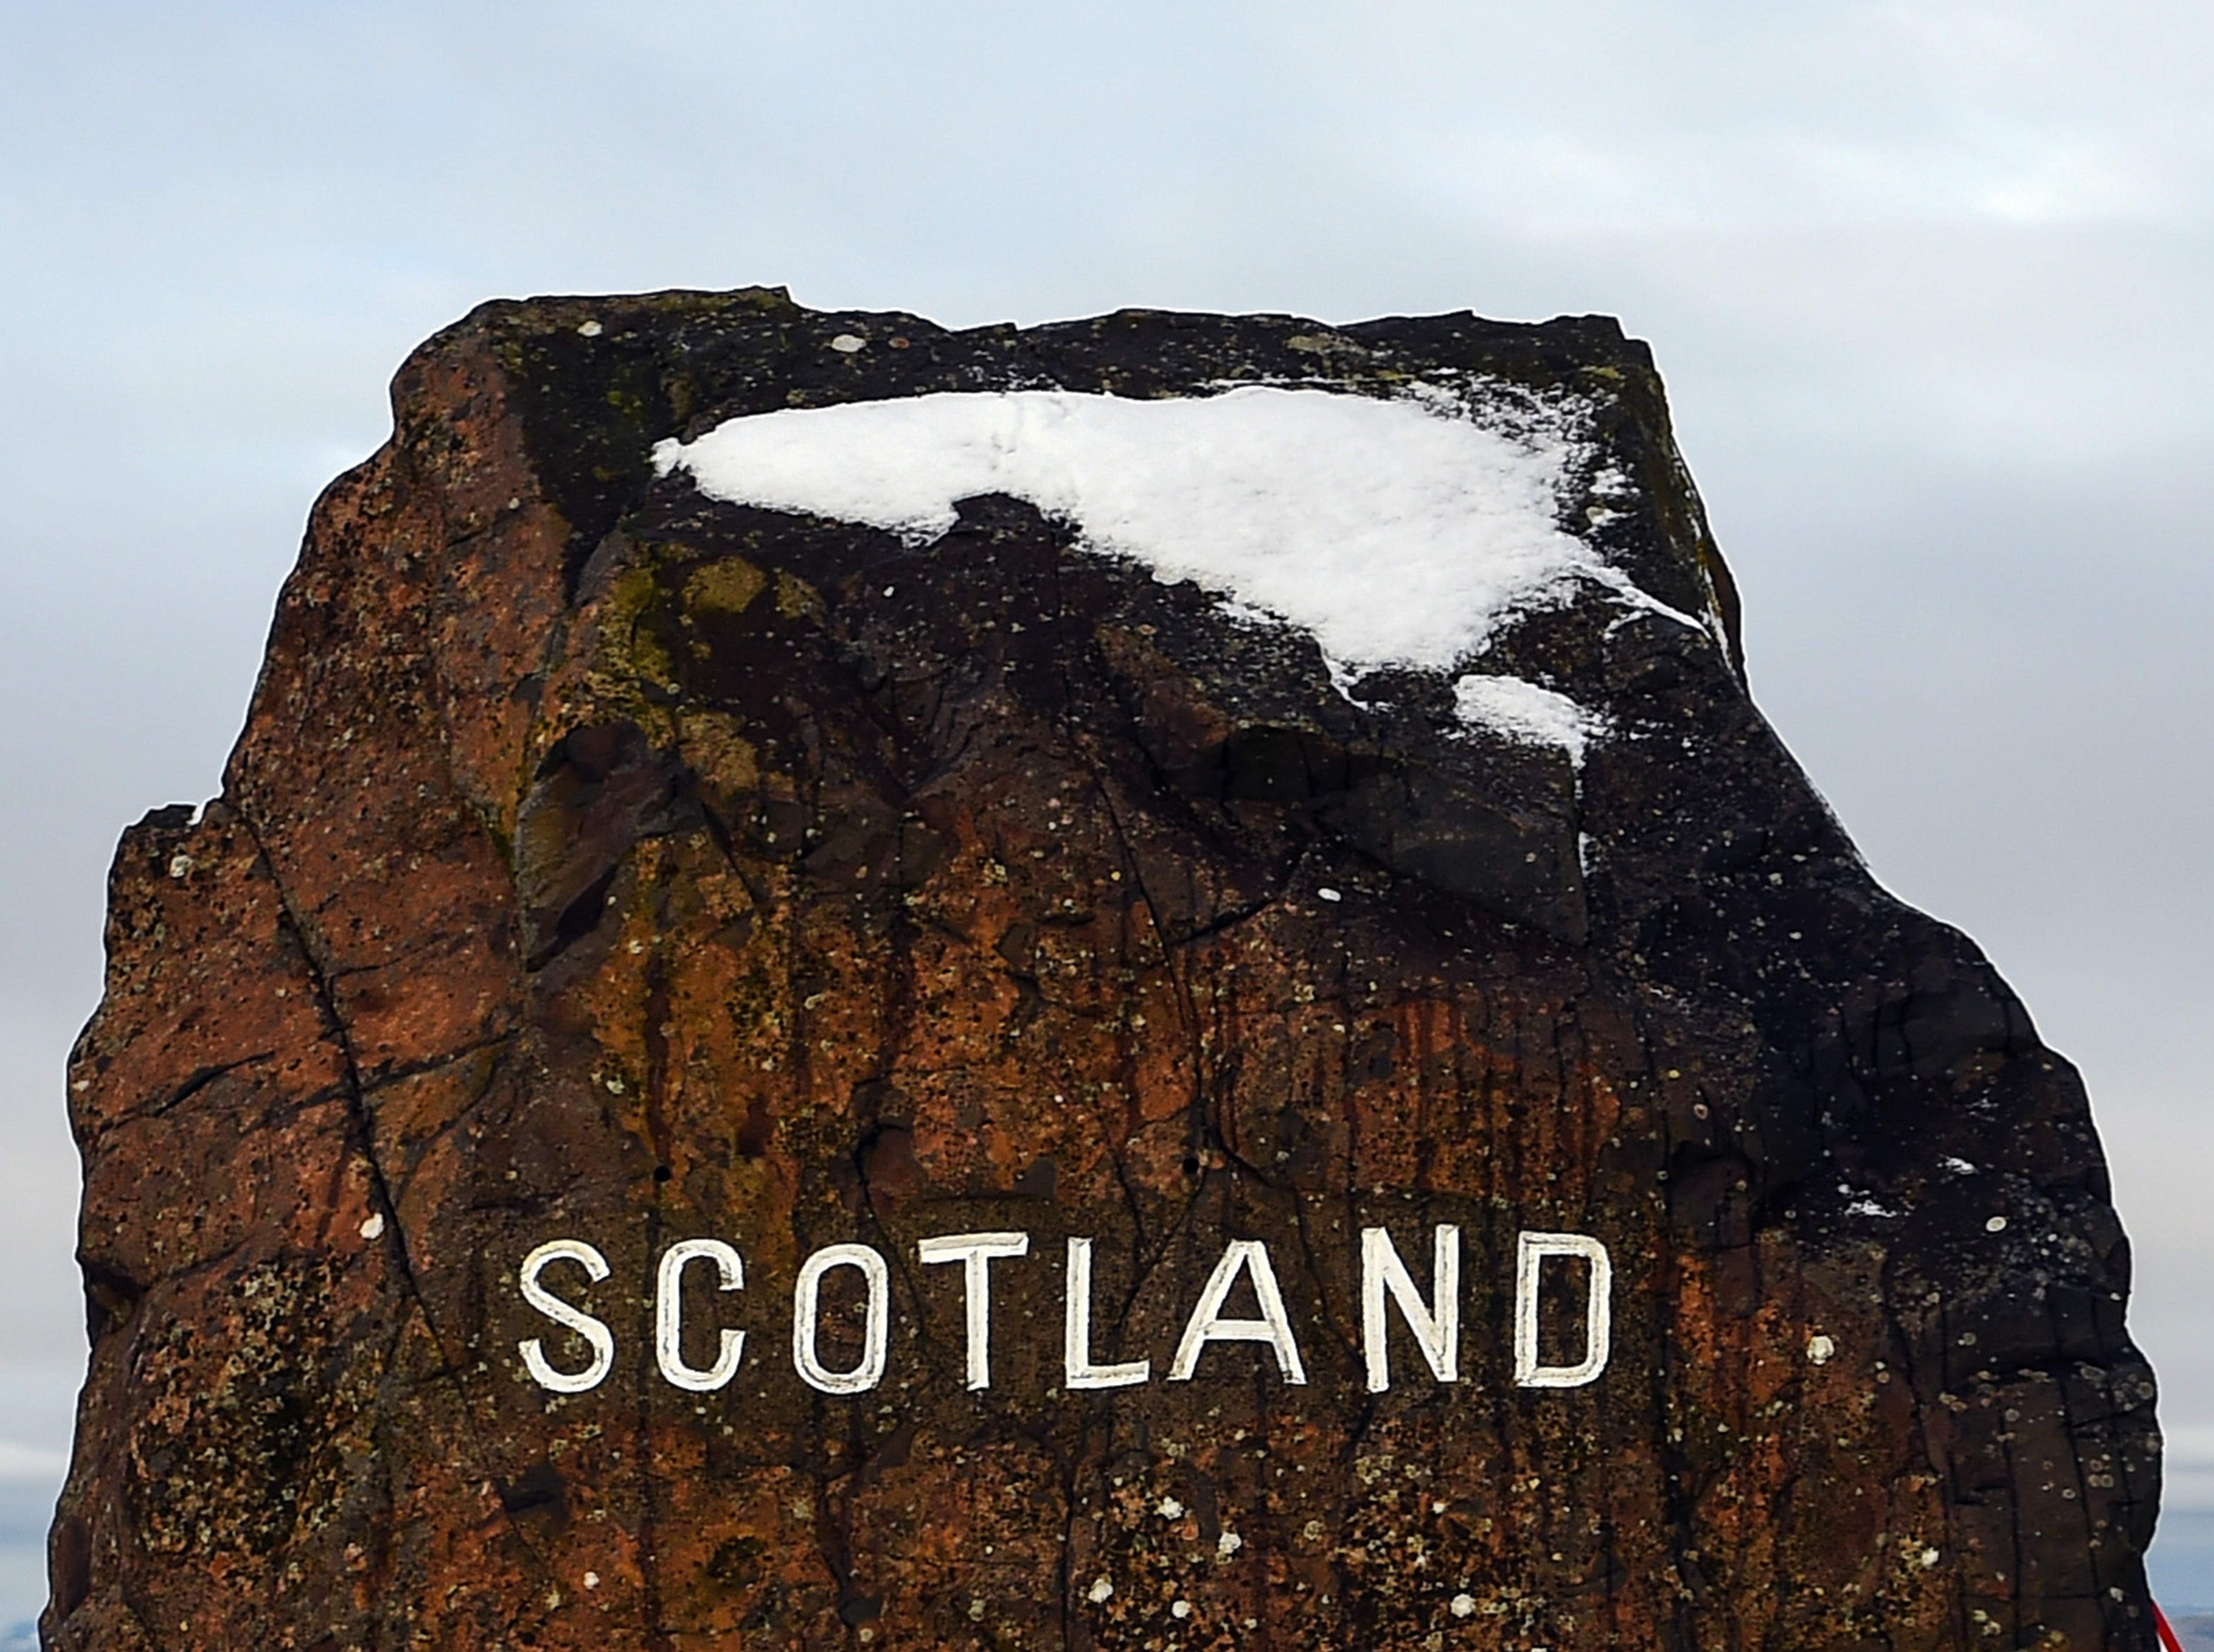 Snow is seen atop a rock on the border between England and Scotland near Jedburgh on 31 December